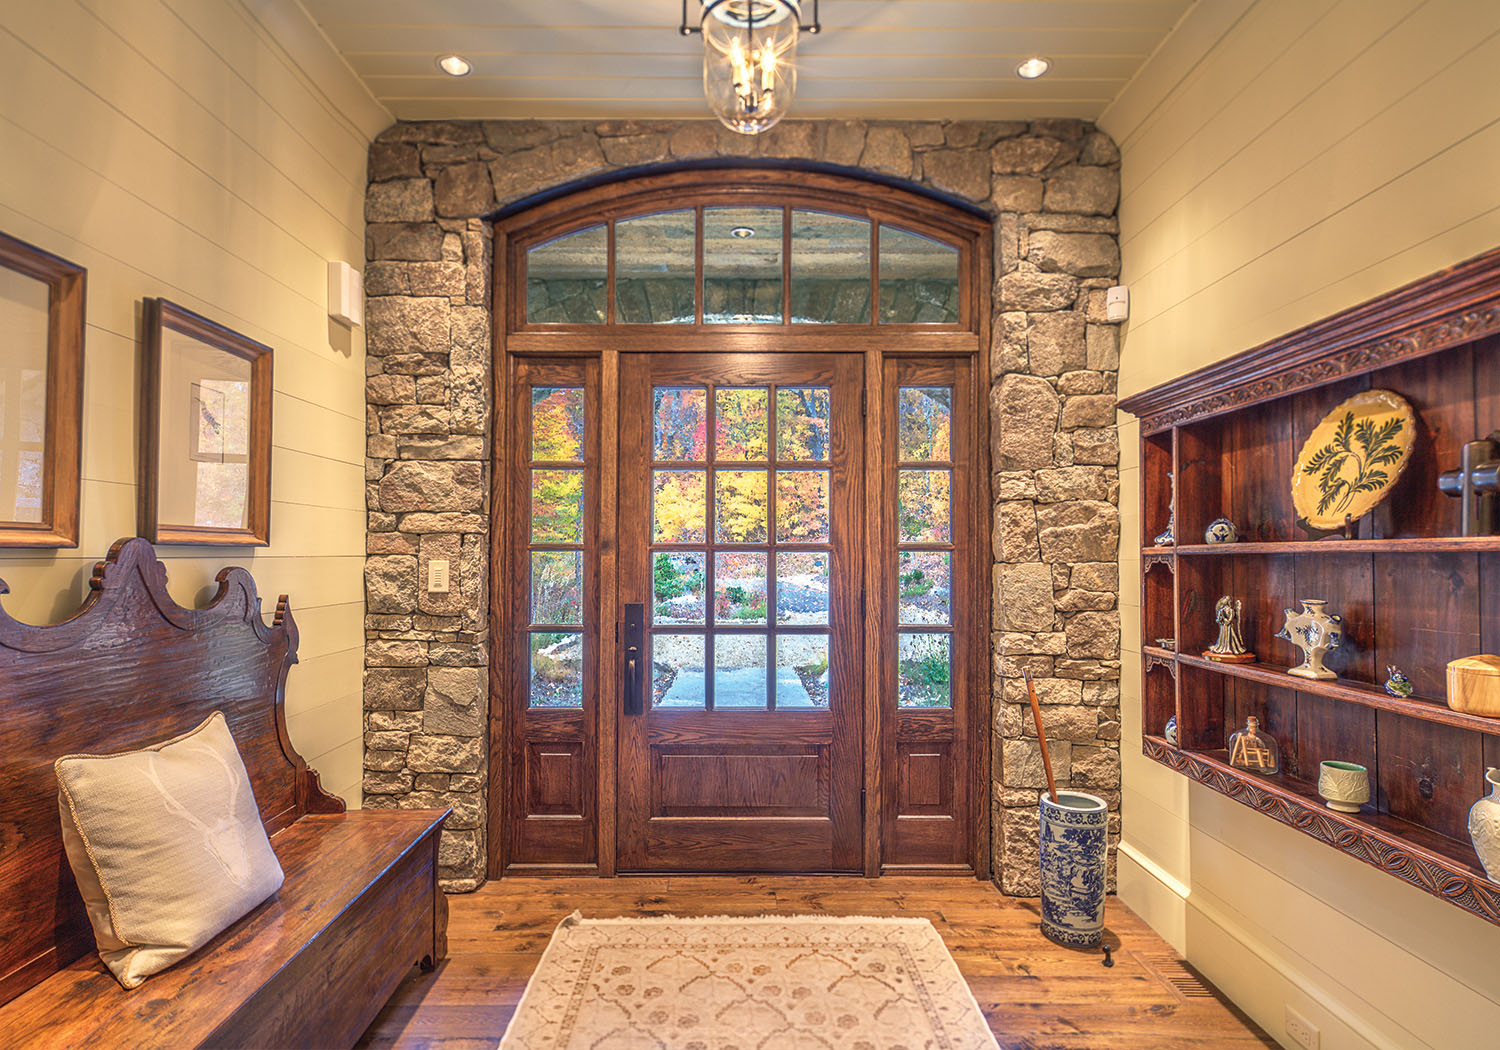 The Goldens decorated the home’s entryway with artwork and furniture acquired during their travels. Stone cladding is by Steep Creek Stoneworks. Photo by Jerry Markatos